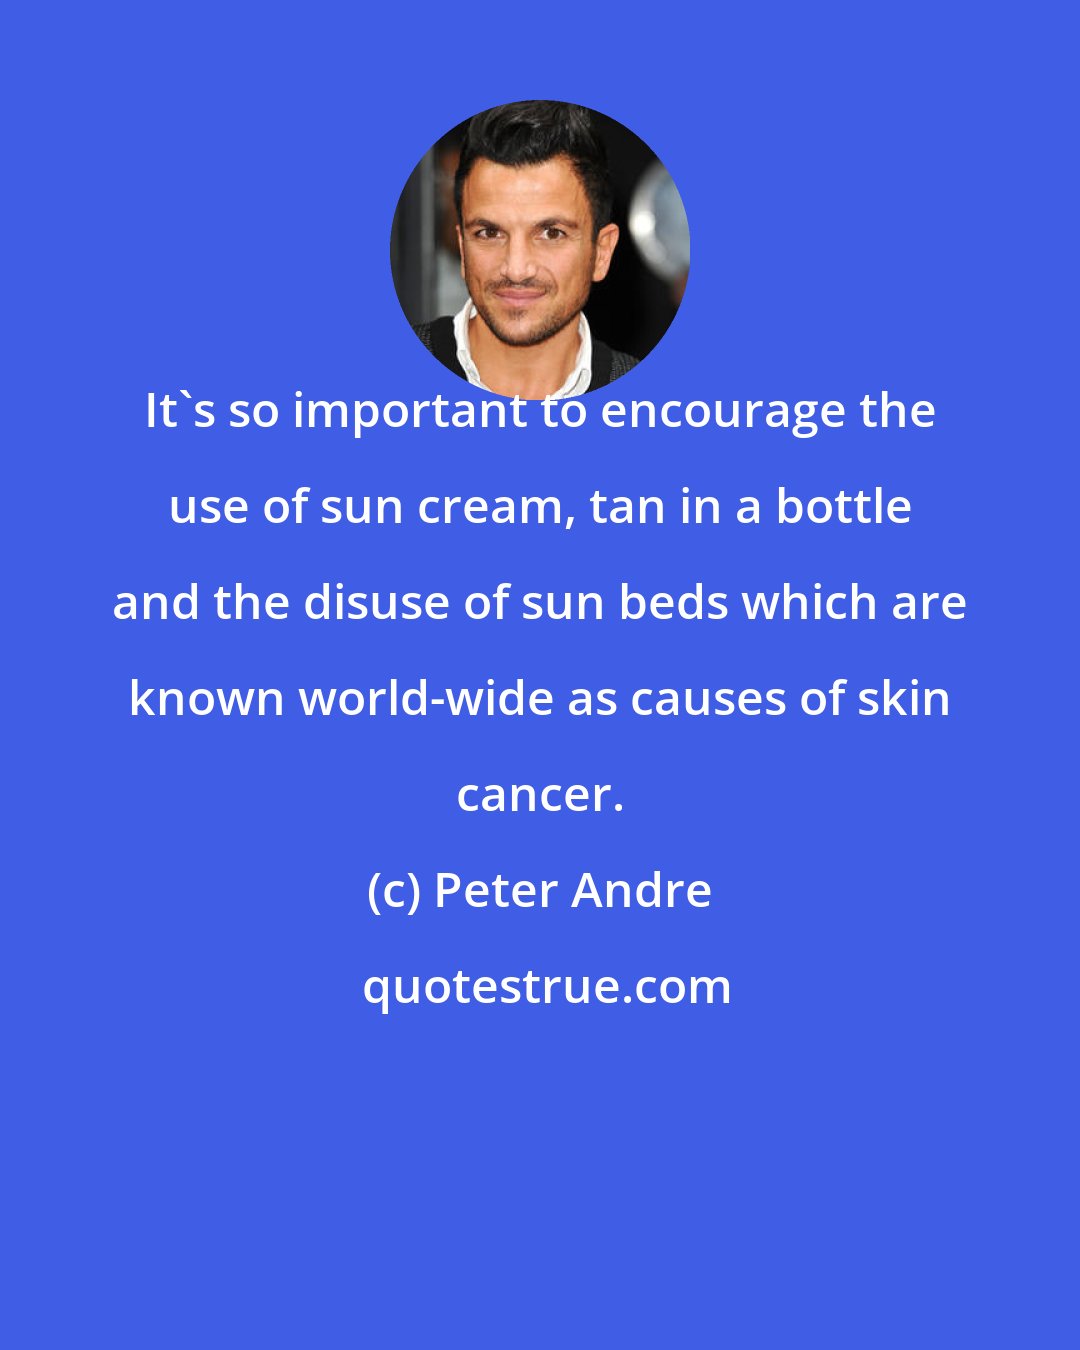 Peter Andre: It's so important to encourage the use of sun cream, tan in a bottle and the disuse of sun beds which are known world-wide as causes of skin cancer.